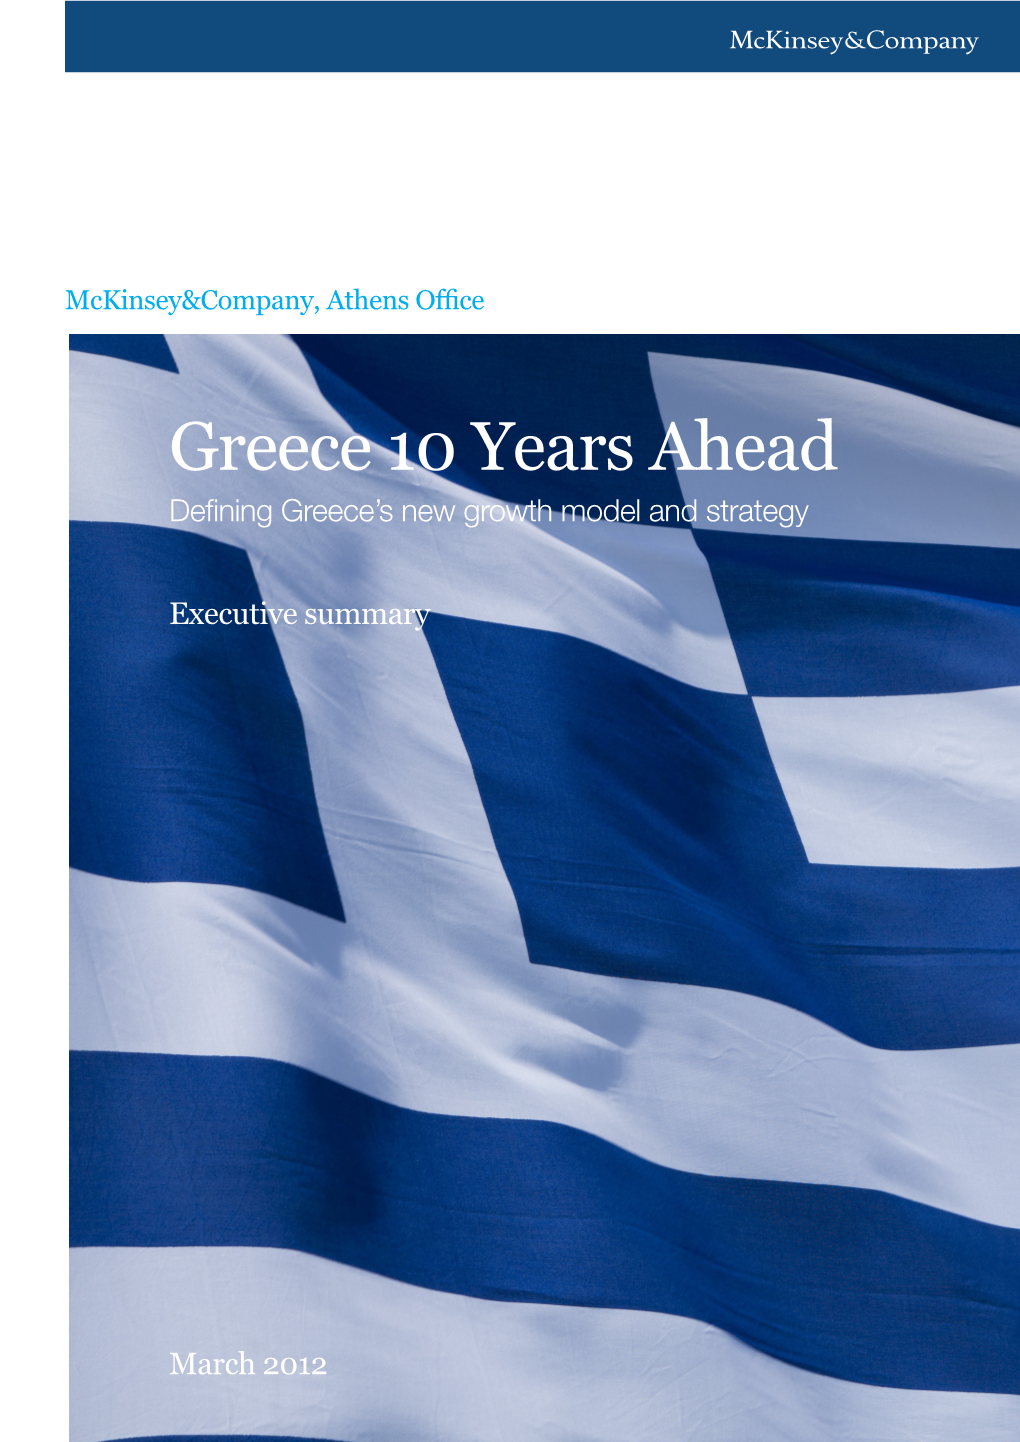 Greece 10 Years Ahead: Defining the New Growth Model and Strategy for Greece – Retail Section Heading 1